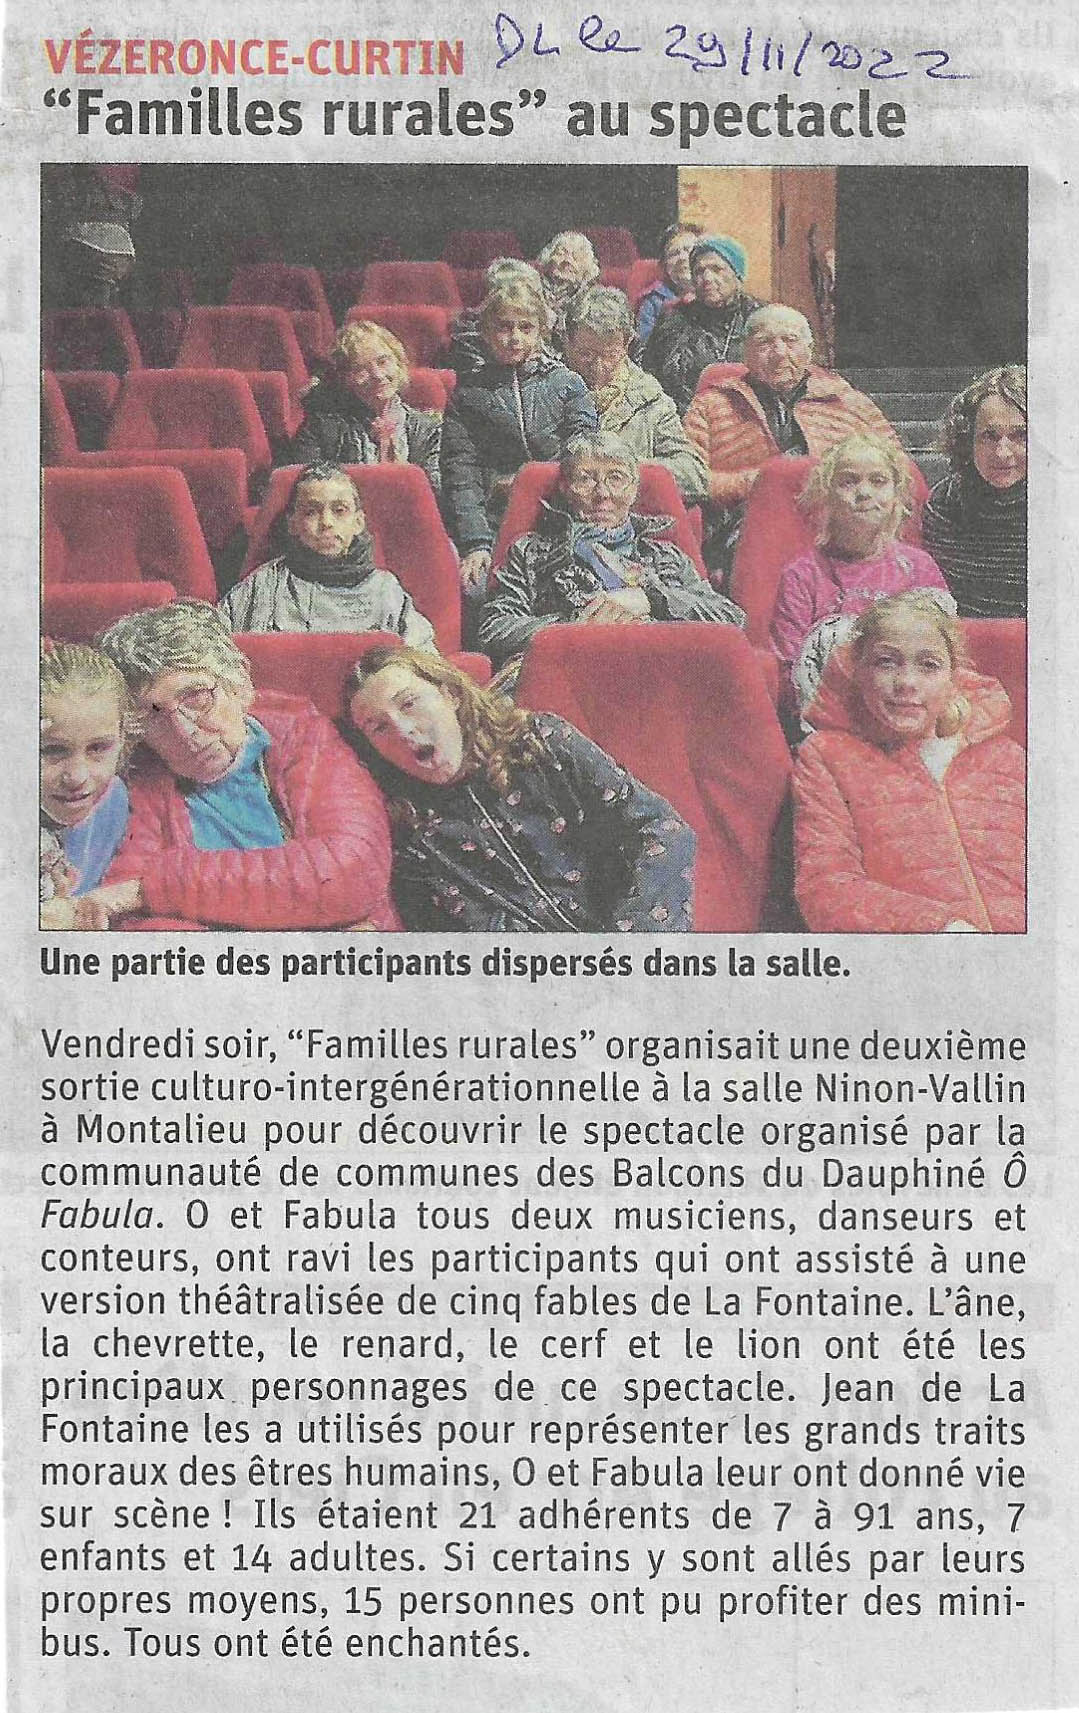 Article DL 29 11 2022 Sortie spectacle O Fabula